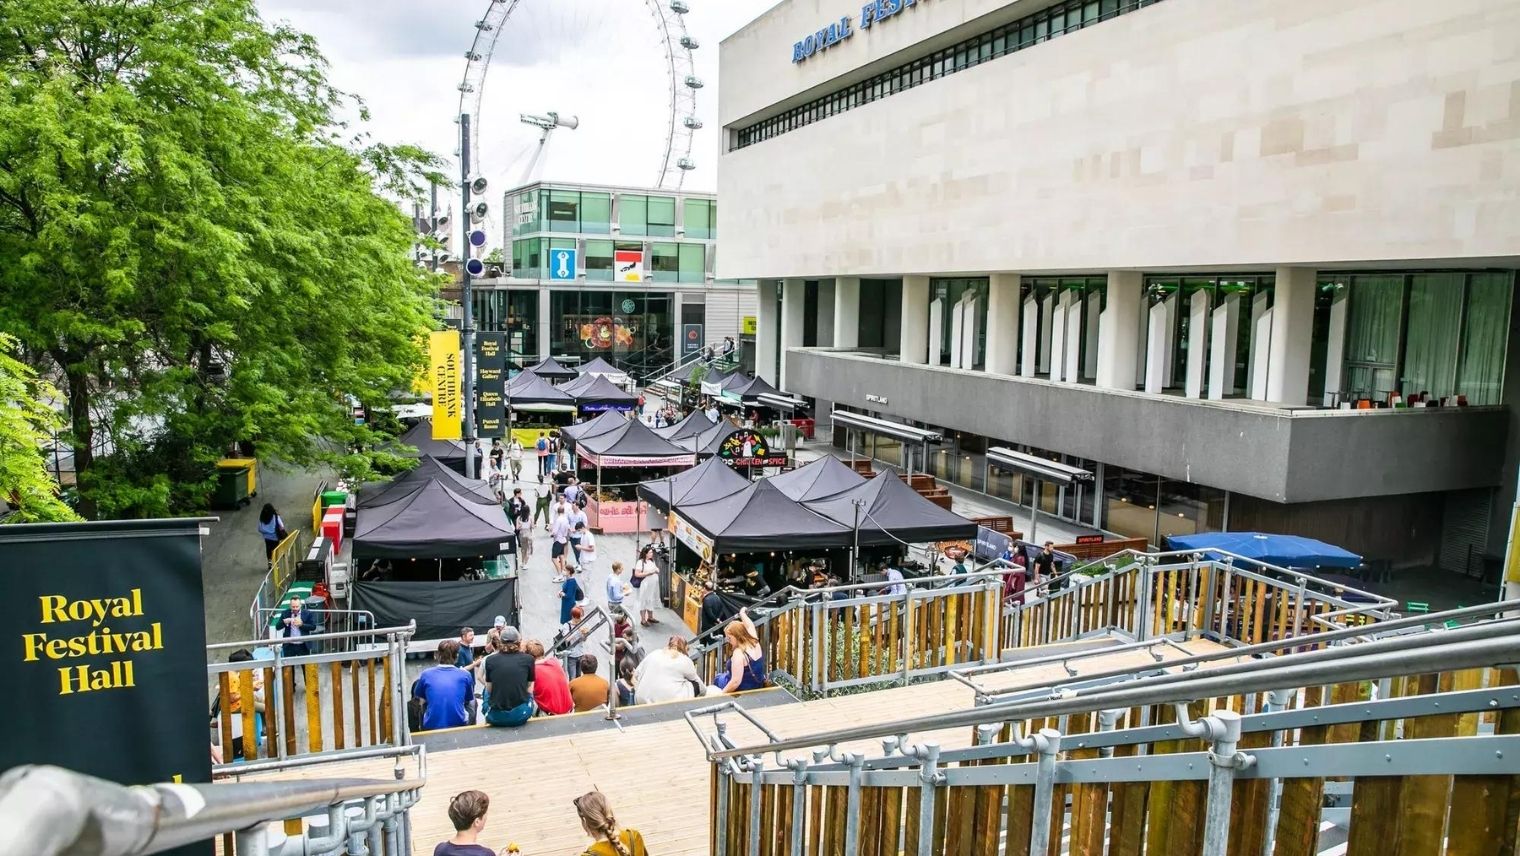 Southbank Centre Food Market seen from steps above the market